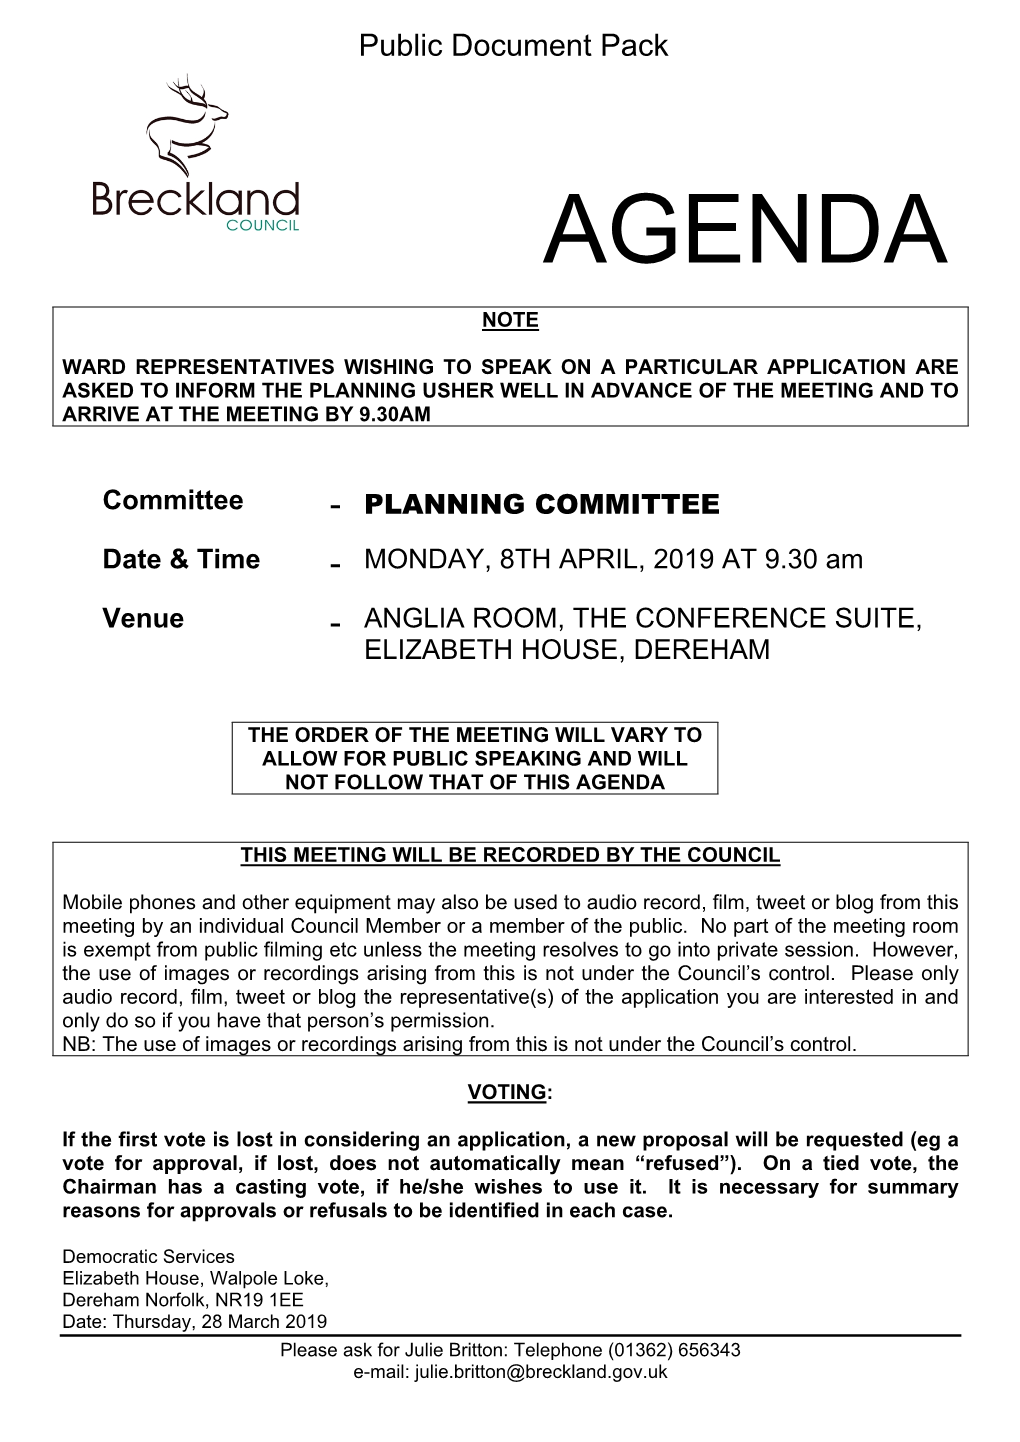 Agenda Document for Planning Committee, 08/04/2019 09:30